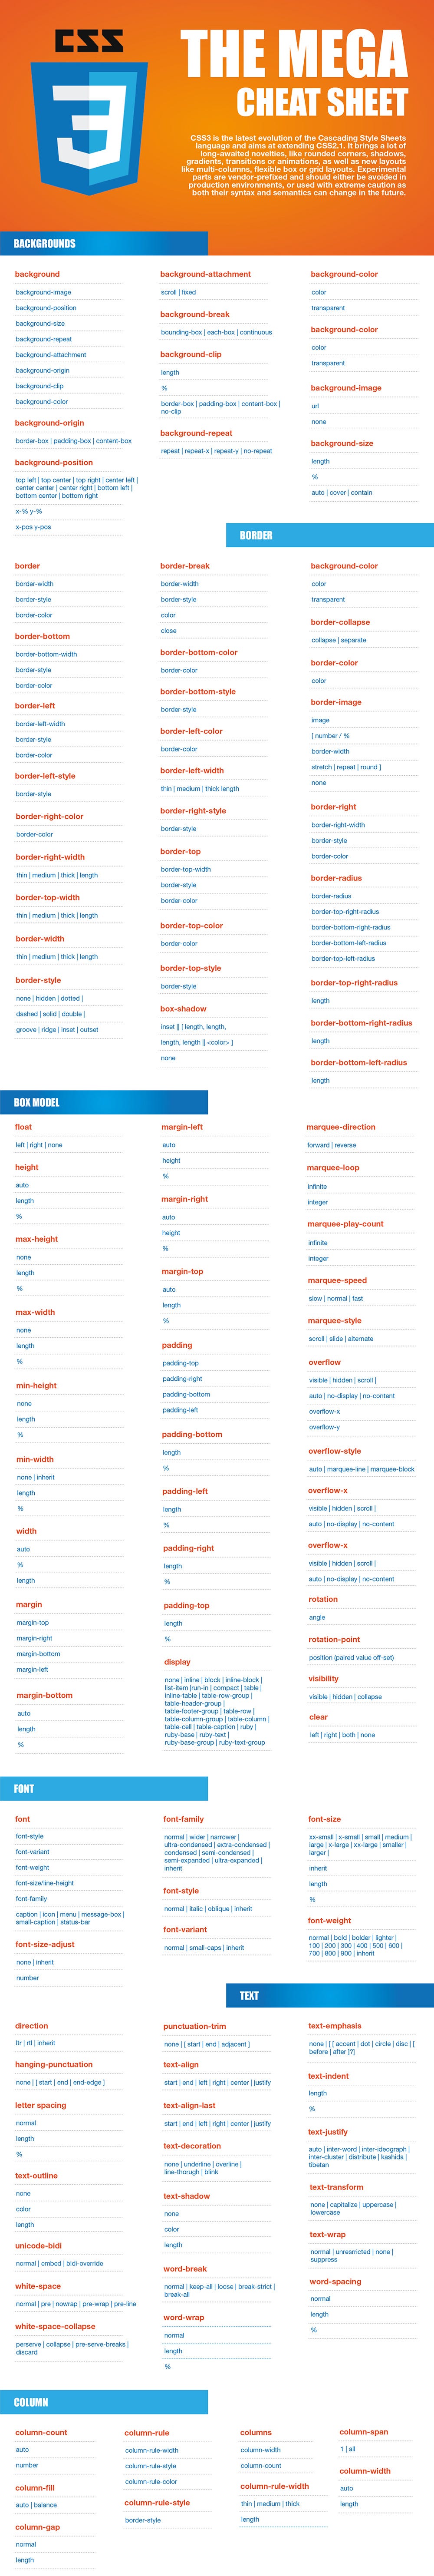 The Mega Css3 Cheat Sheet By Bradley Nice Content Manager At By